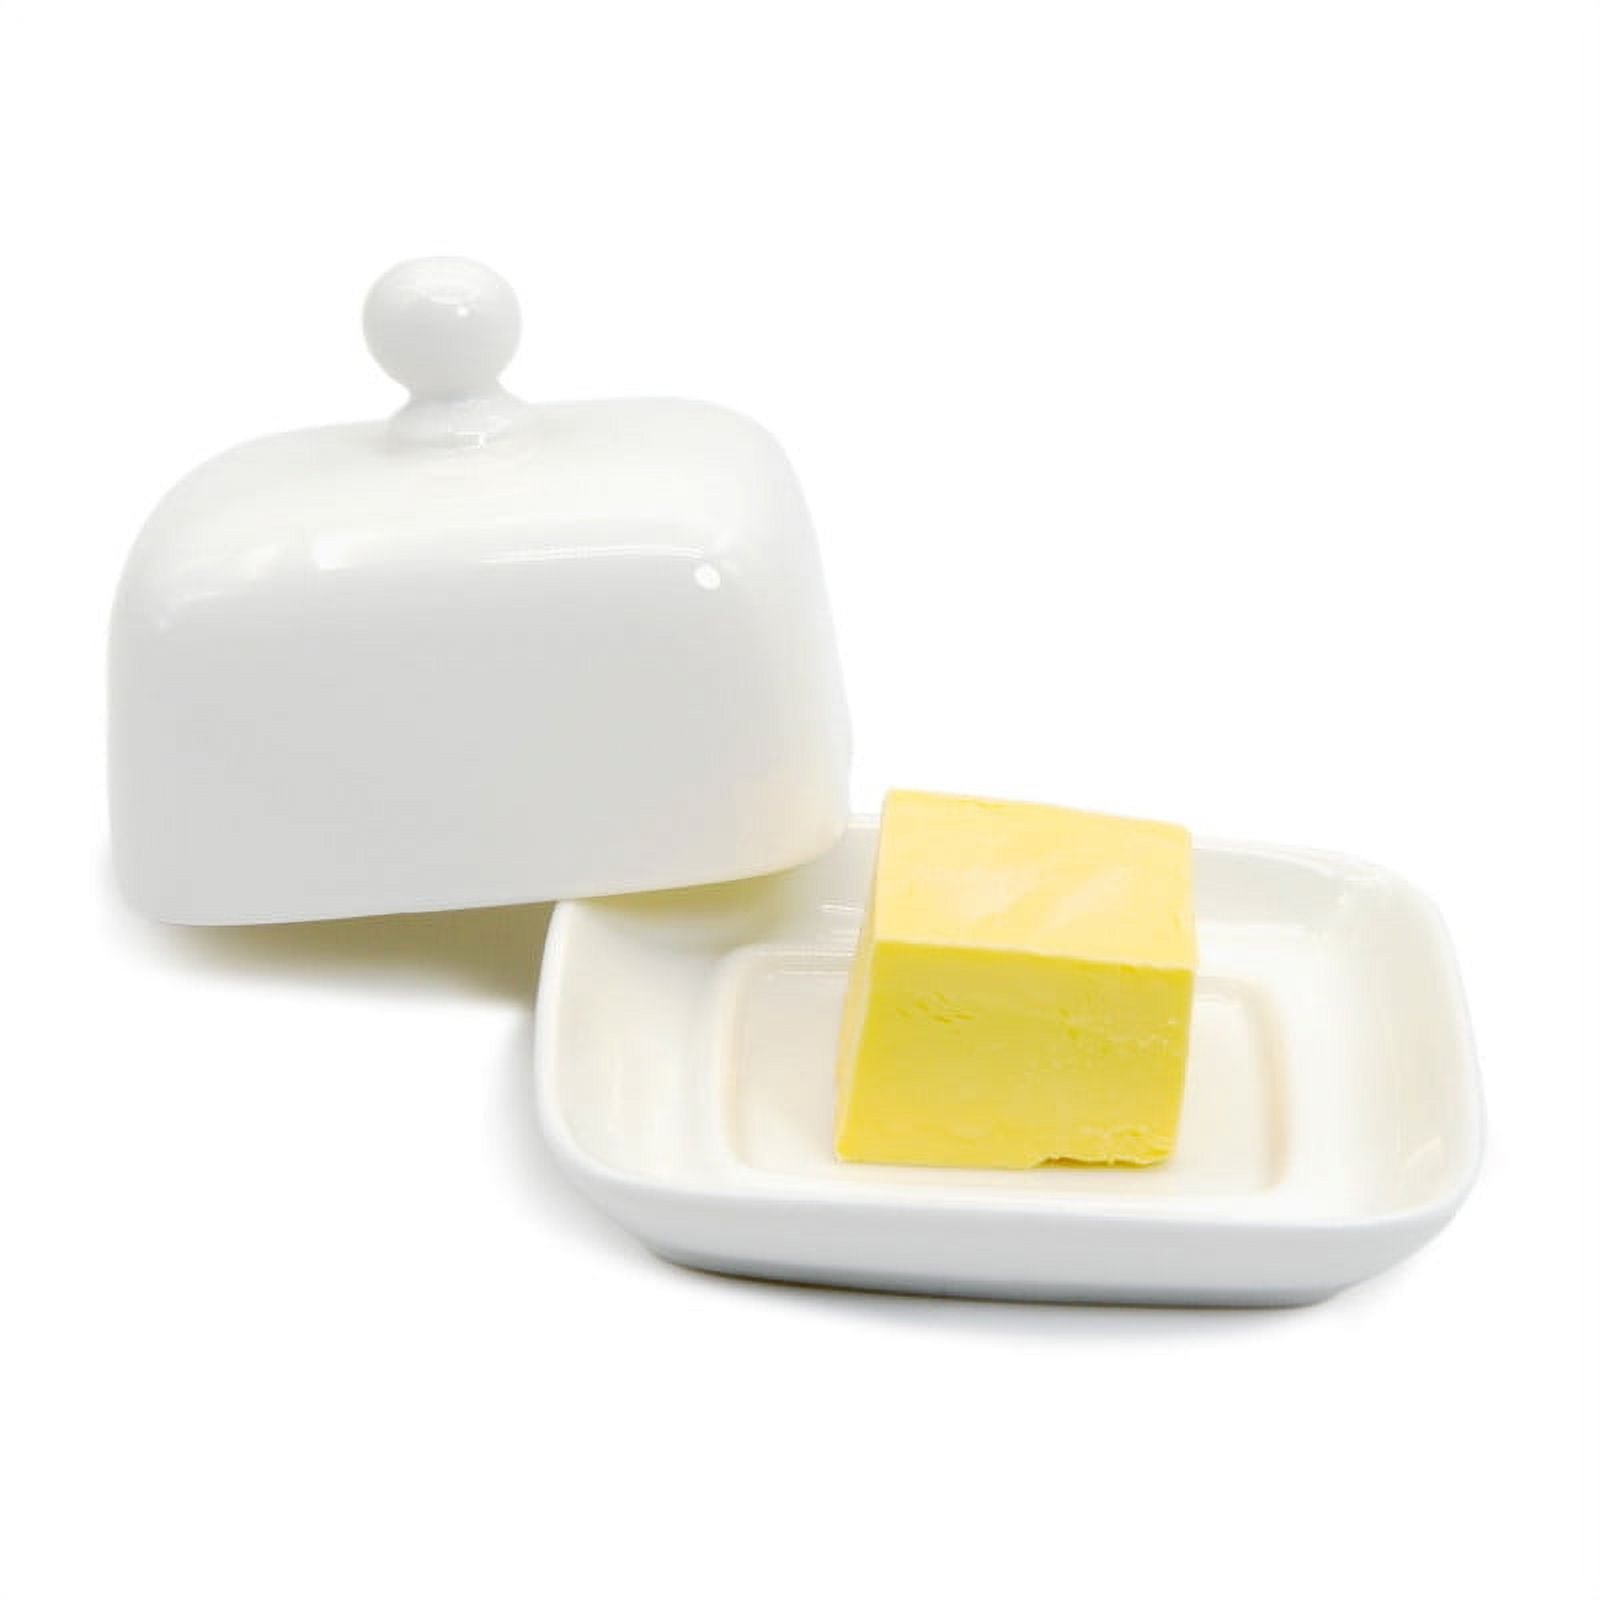 MKLZ Small Butter Dish with Lid, Individual Mini White Ceramic Butter Holder,  Square 